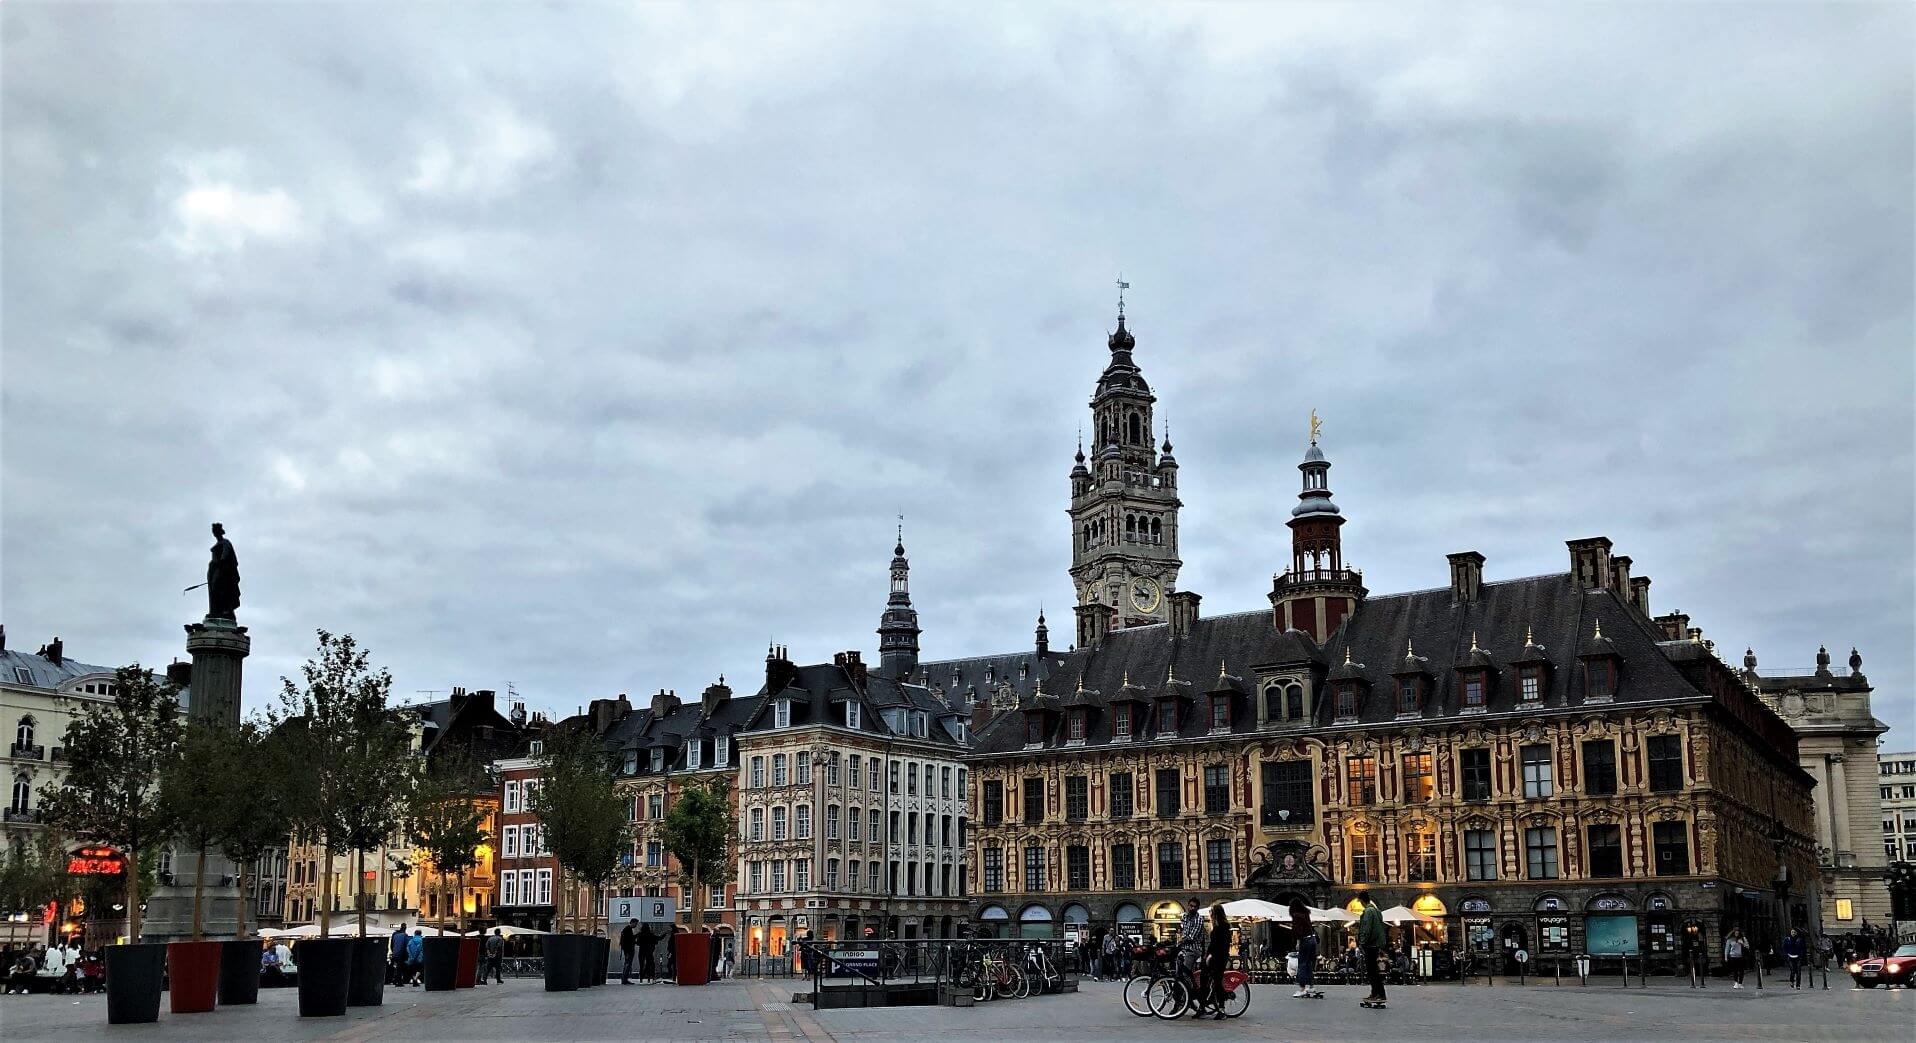 The square in Lille, France.